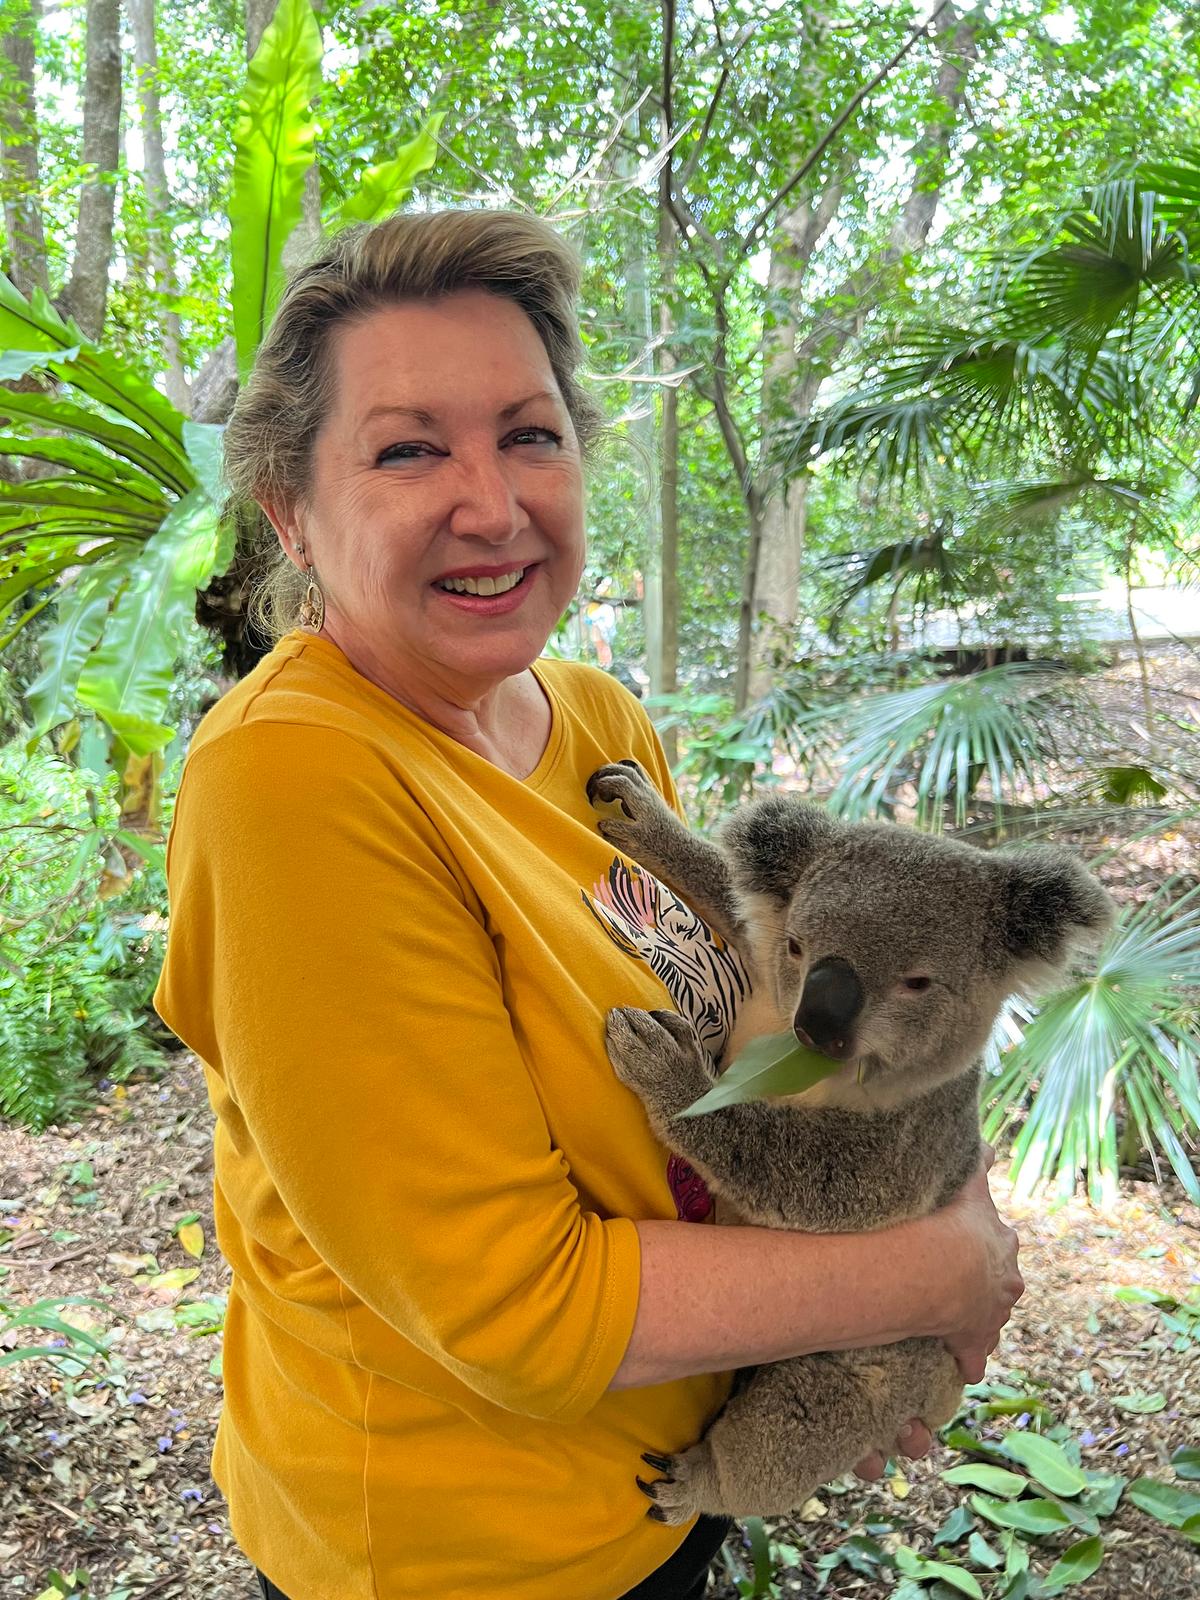 At Lone Pine Koala Sanctuary in Fig Tree Pocket near Brisbane, guests, including writer Mary Ann Anderson, are allowed to cuddle with and feed a koala for a few moments. Lone Pine is one of the few places in the world where guests can actually hold a koala. (Lone Pine Koala Sanctuary/TNS)